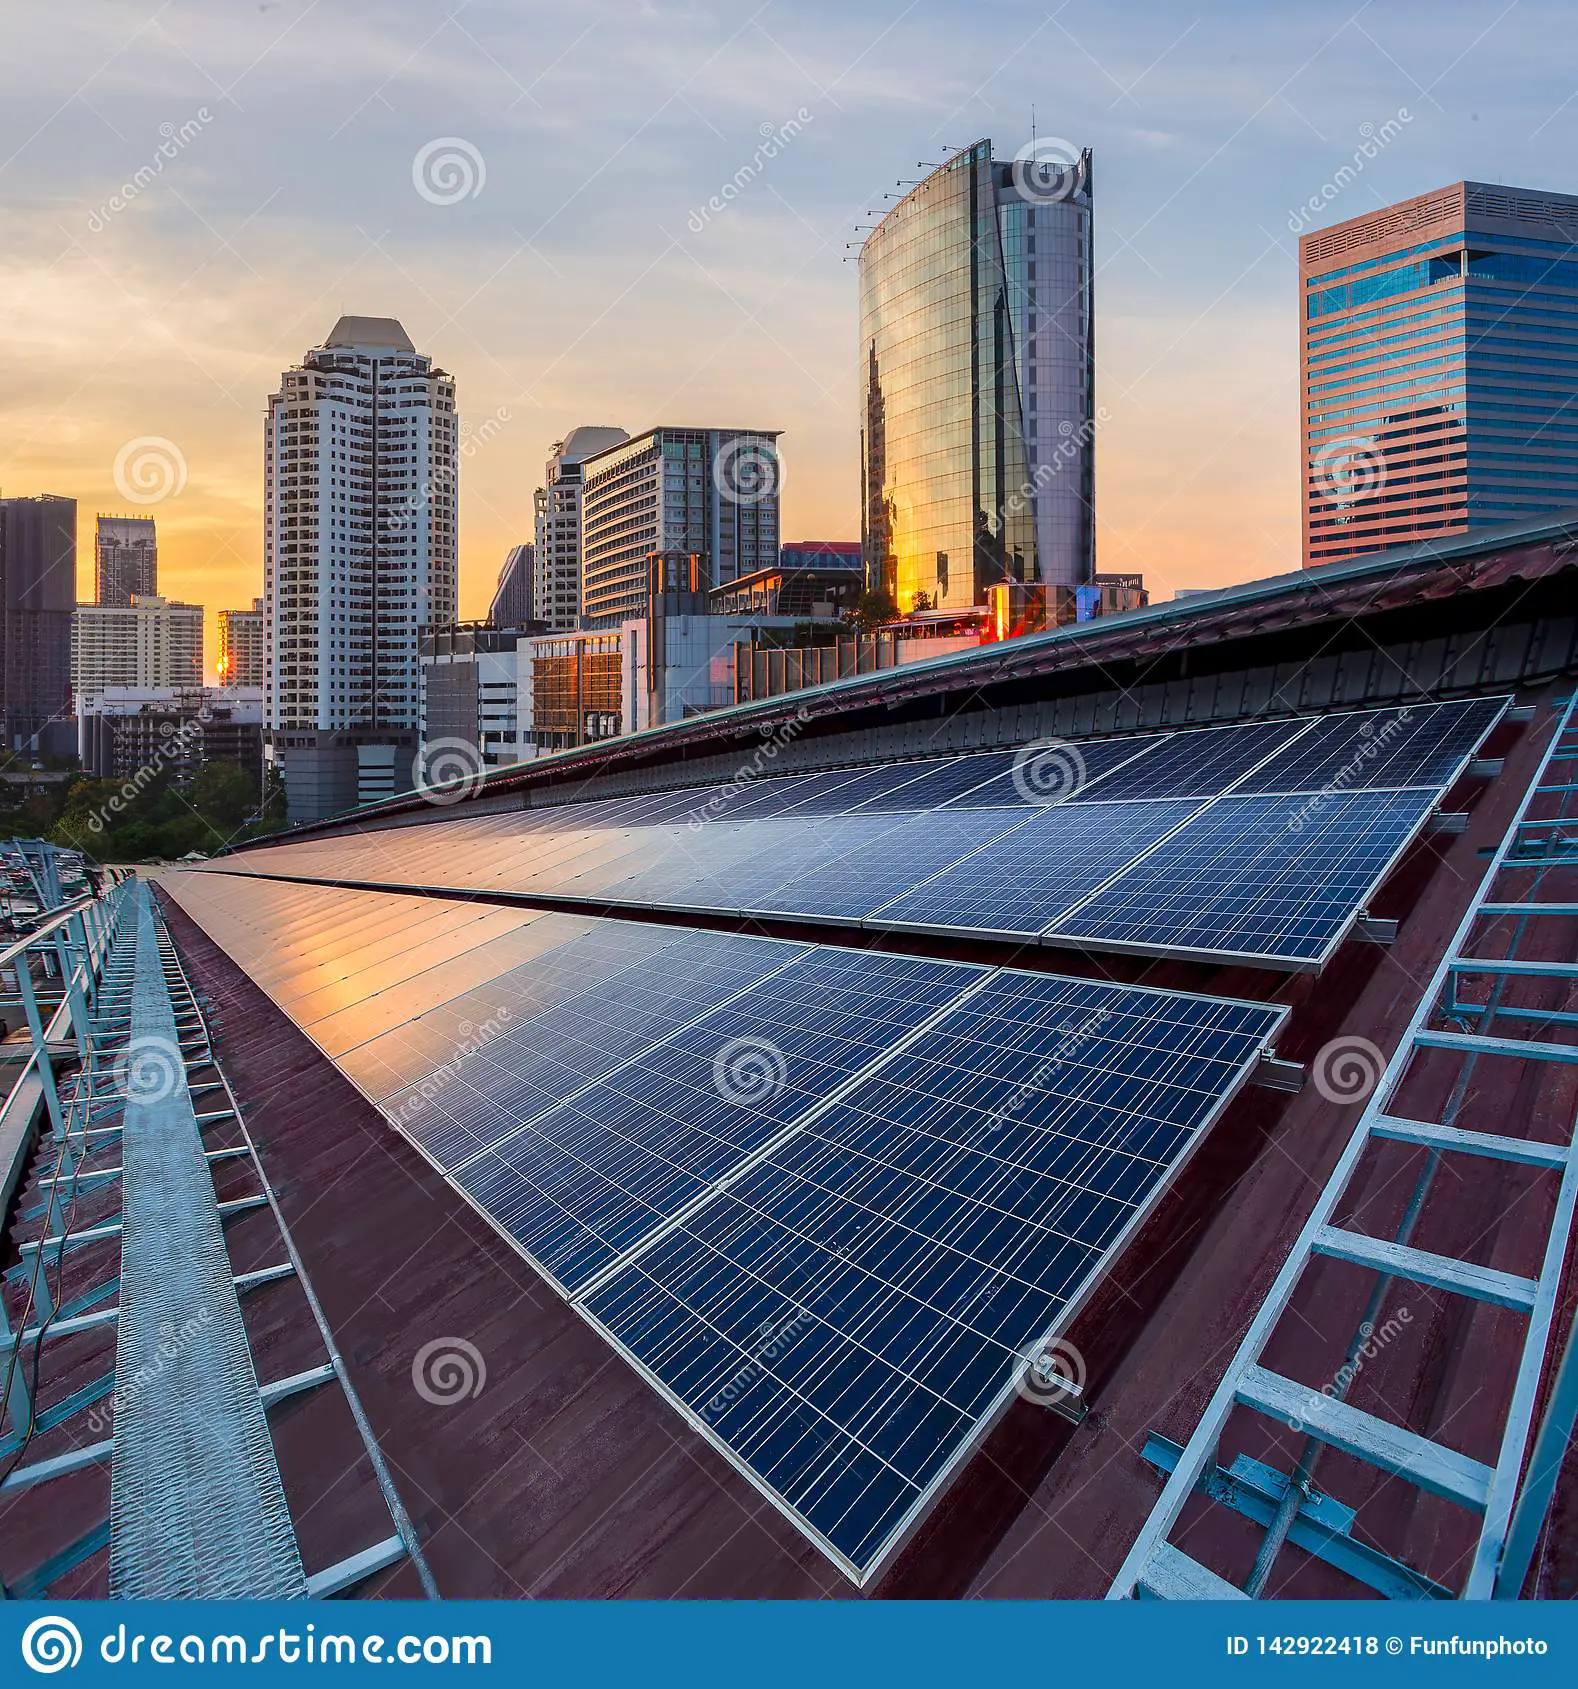 Solar Panel Photovoltaic Installation On A Roof Of Factory, Sunny Blue ...